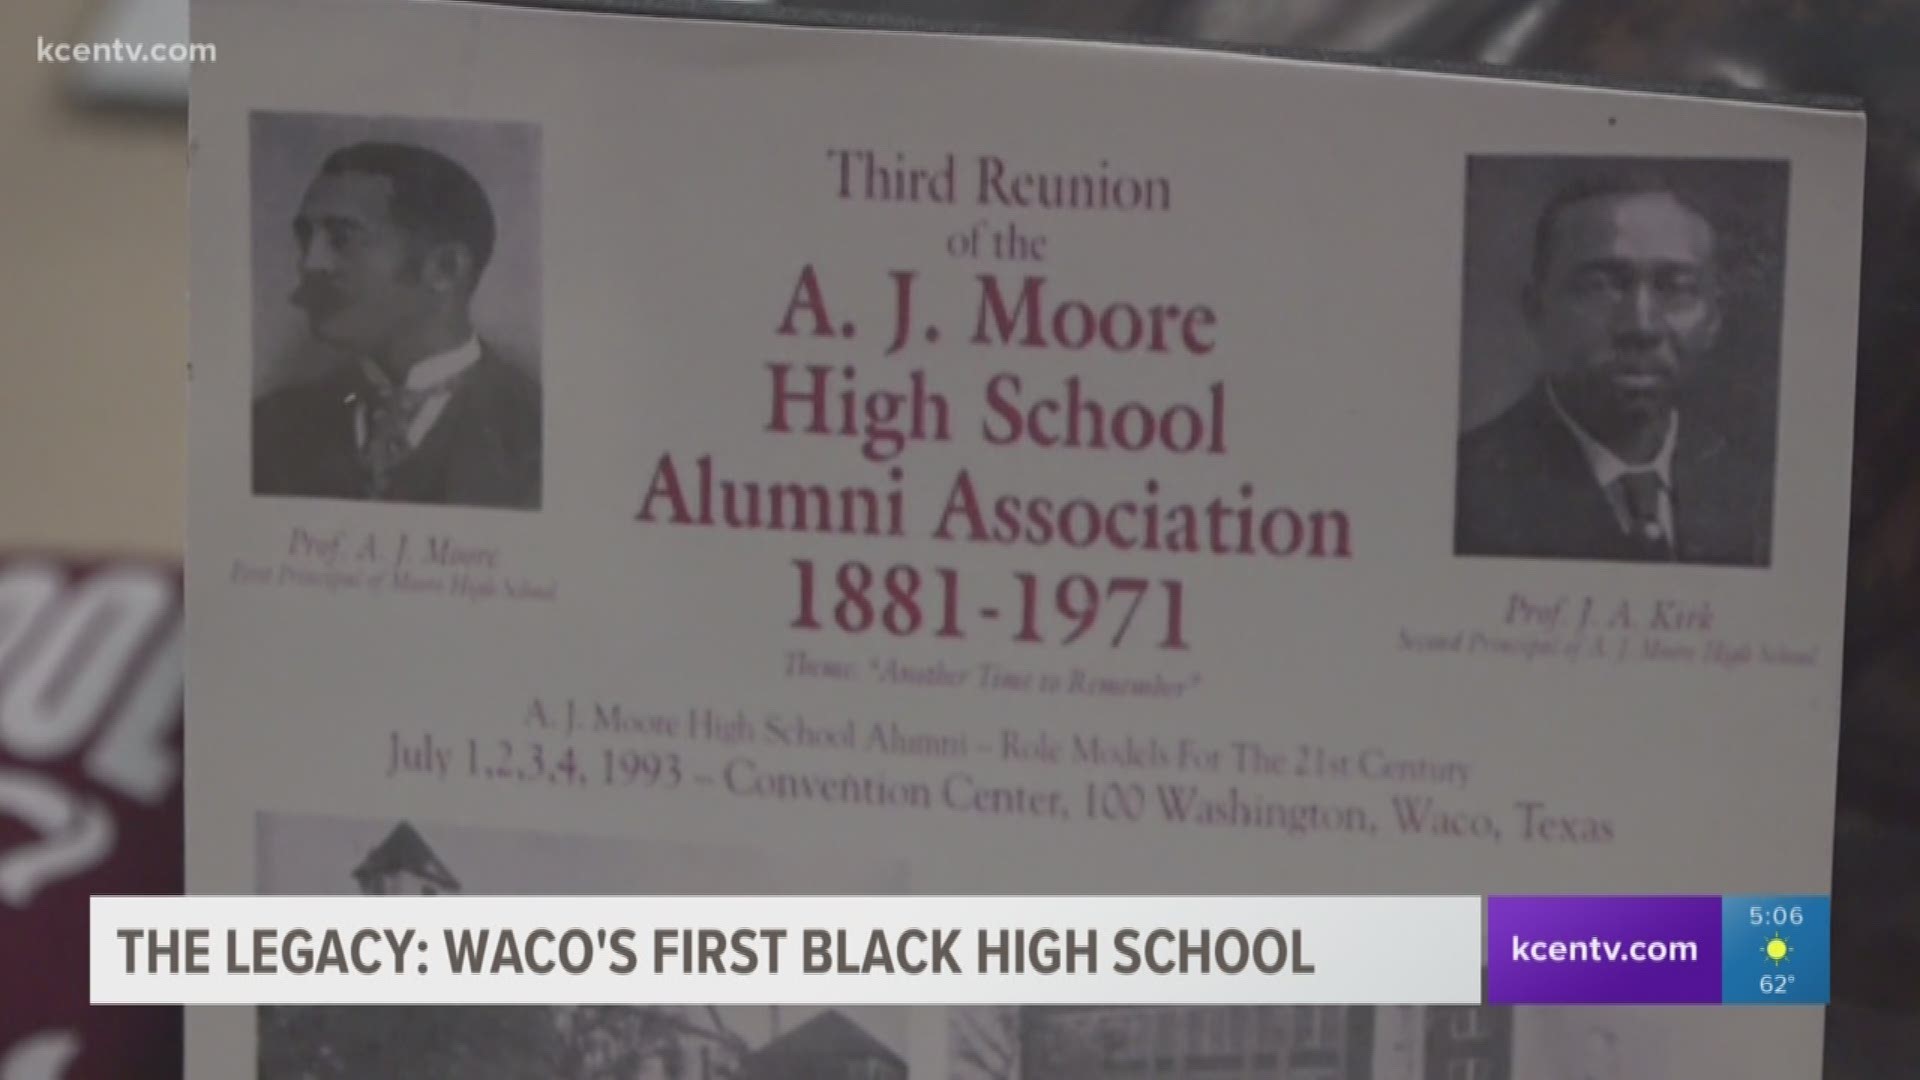 A group in Central Texas is shining light on black history in Waco.